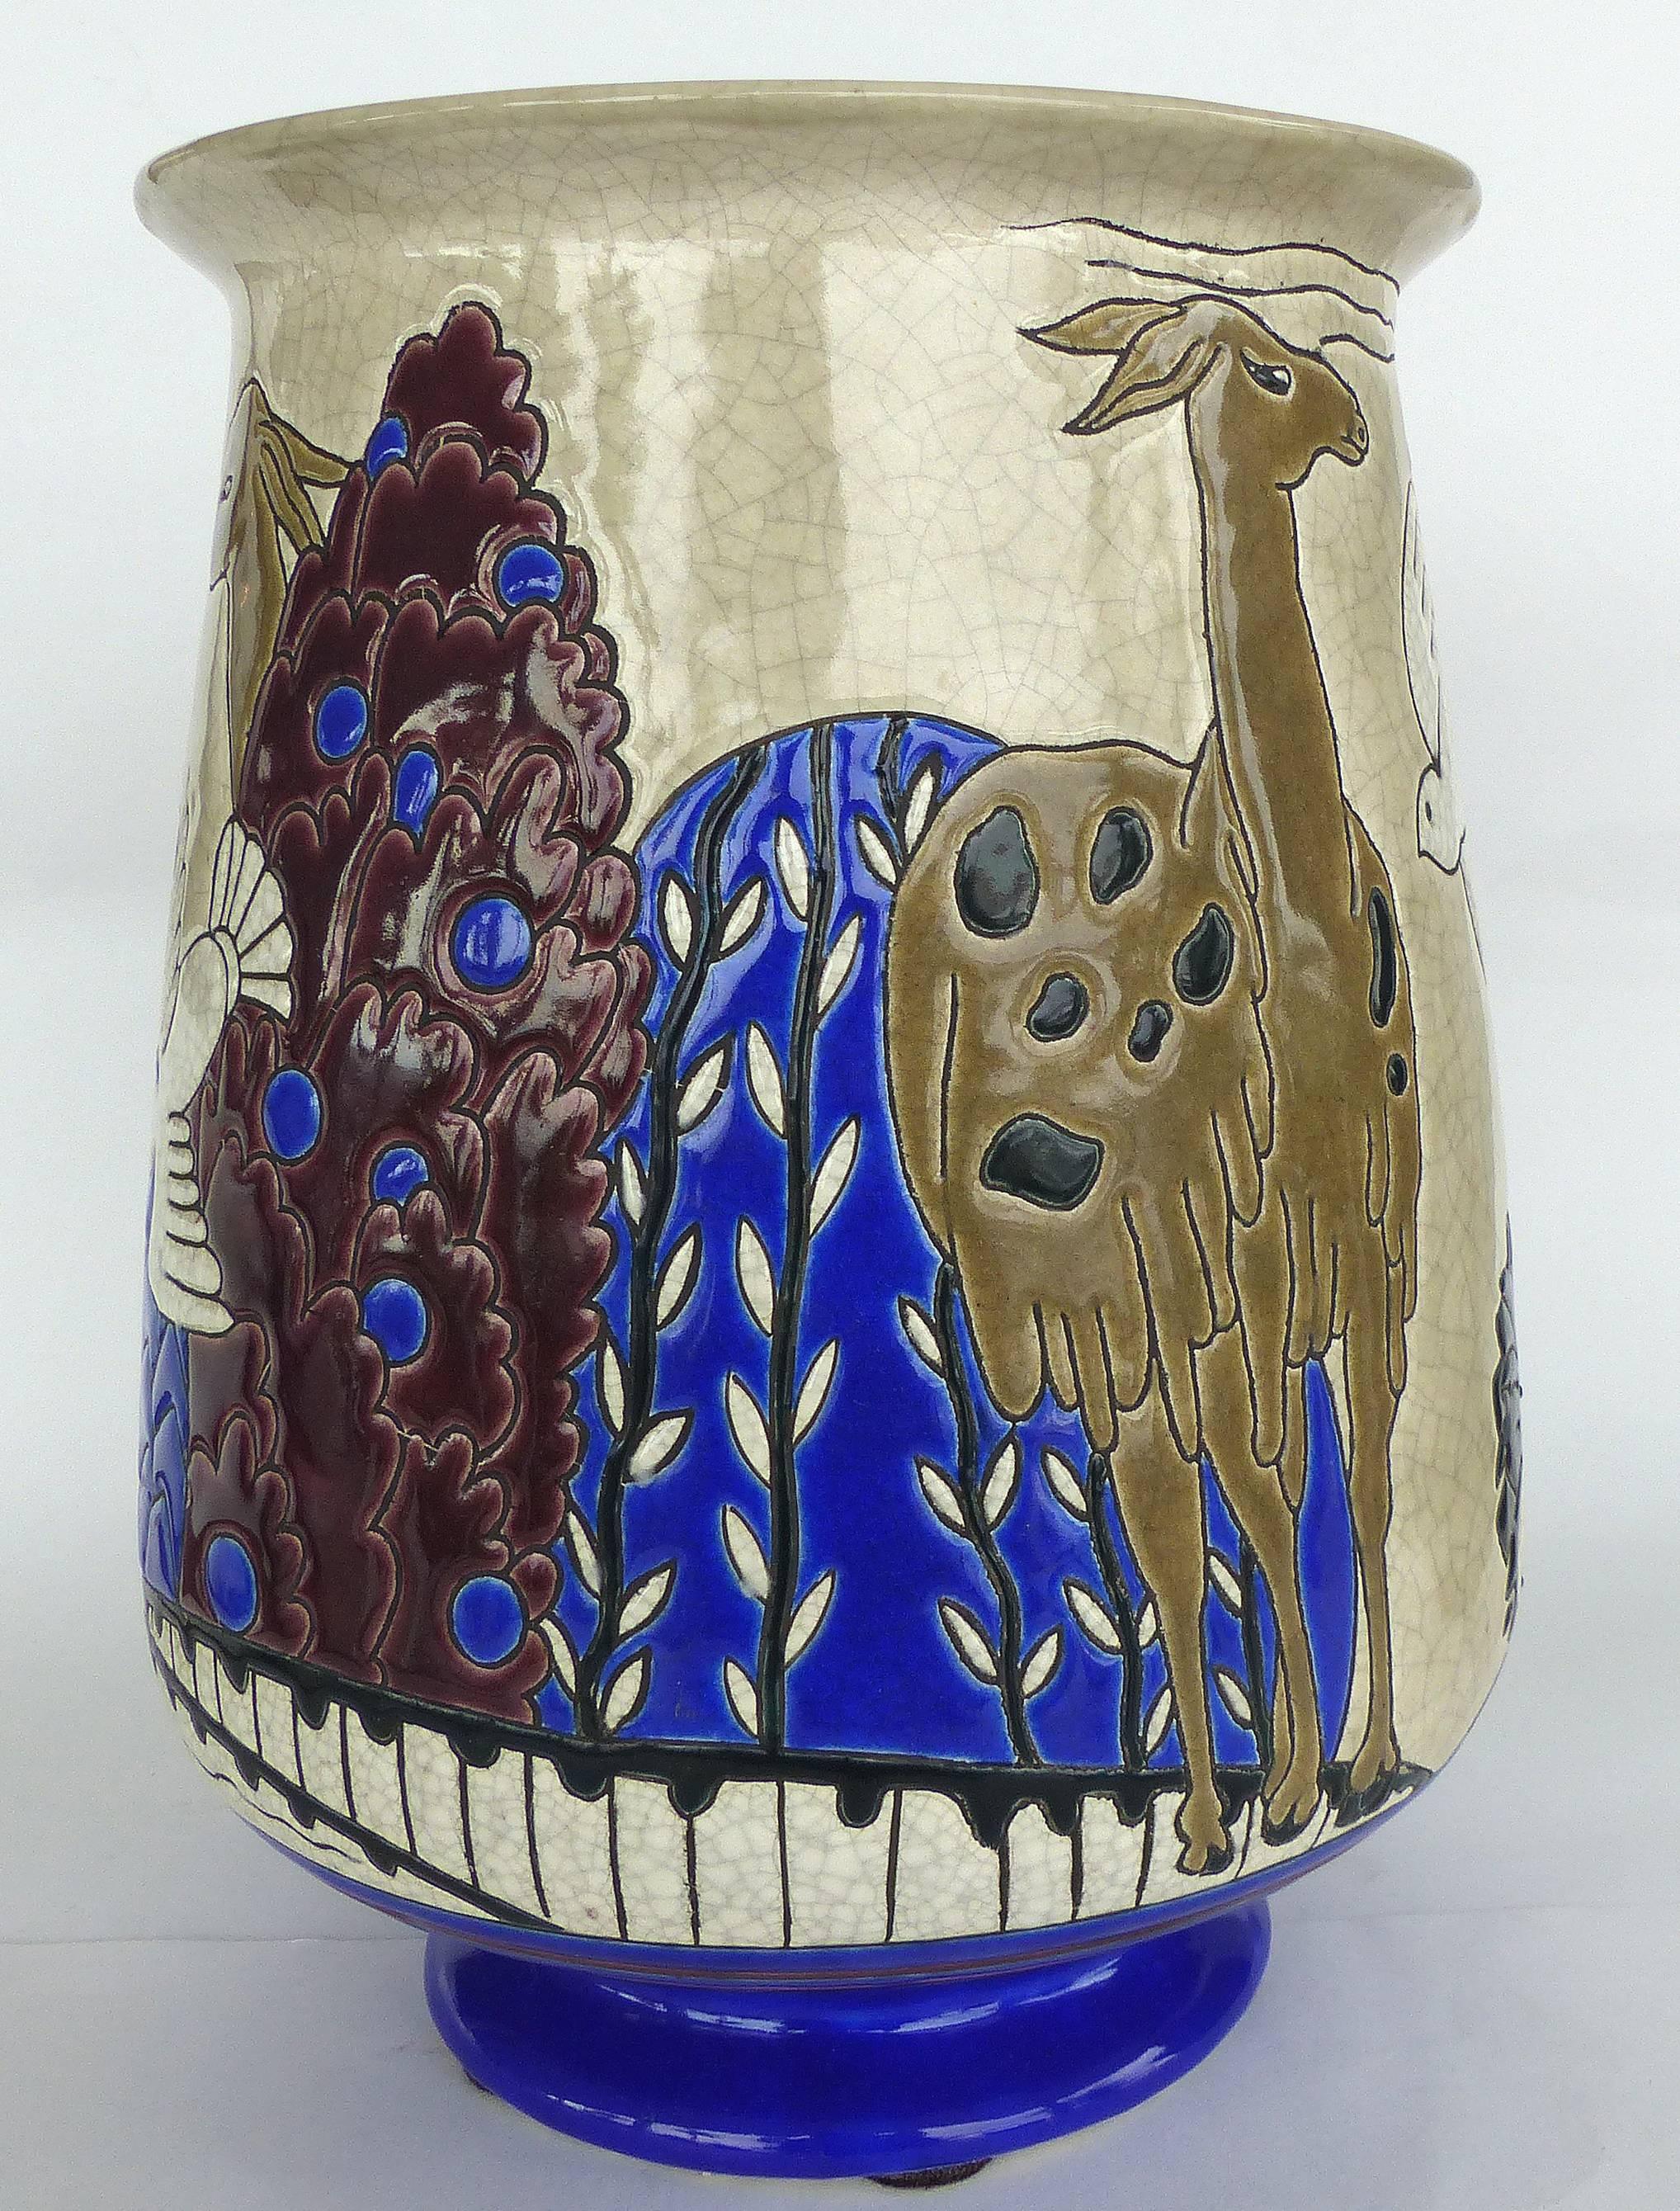 Longwy Primavera Art Deco Tulip Vase, circa 1930, France

Offered for sale is a striking example of a French Art Deco Longwy Primavera tulip form vase, circa 1925-1930 of glazed enamels on an incised ceramic clay form depicting llamas and birds. In